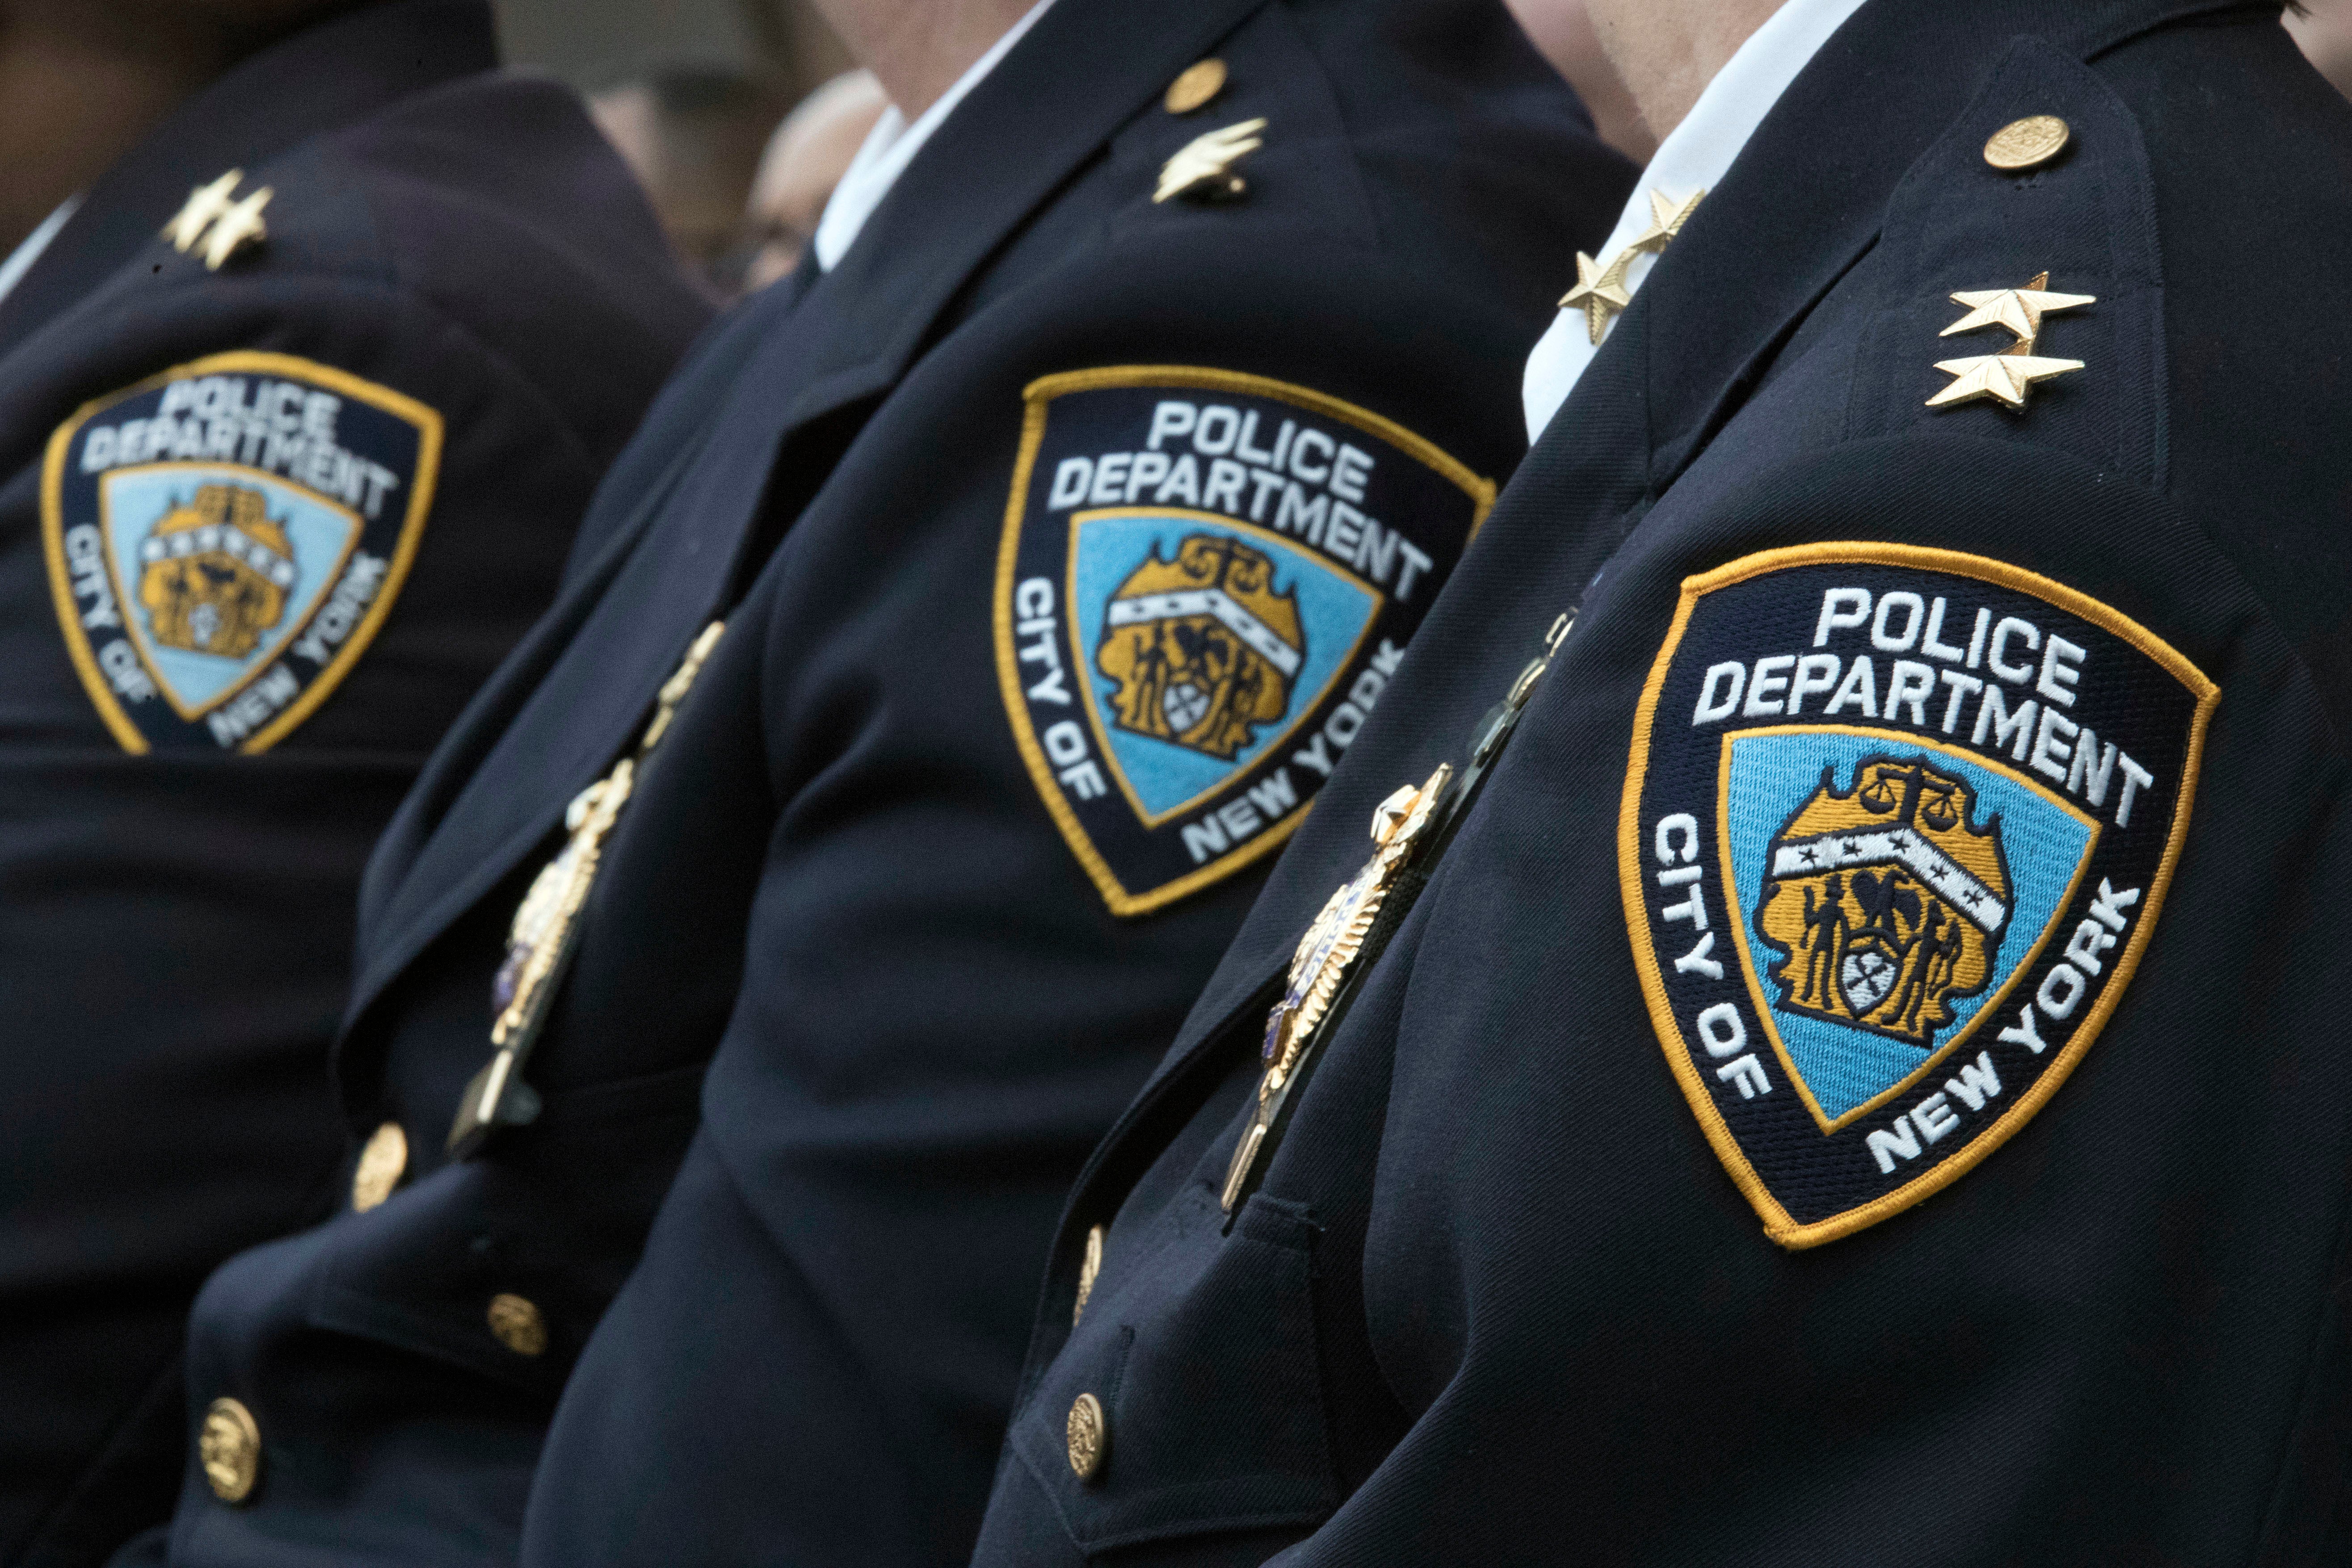 A gunshot detection system has resulted in hundreds of hours wasted by NYPD officers responding to false alarms, a new audit has found